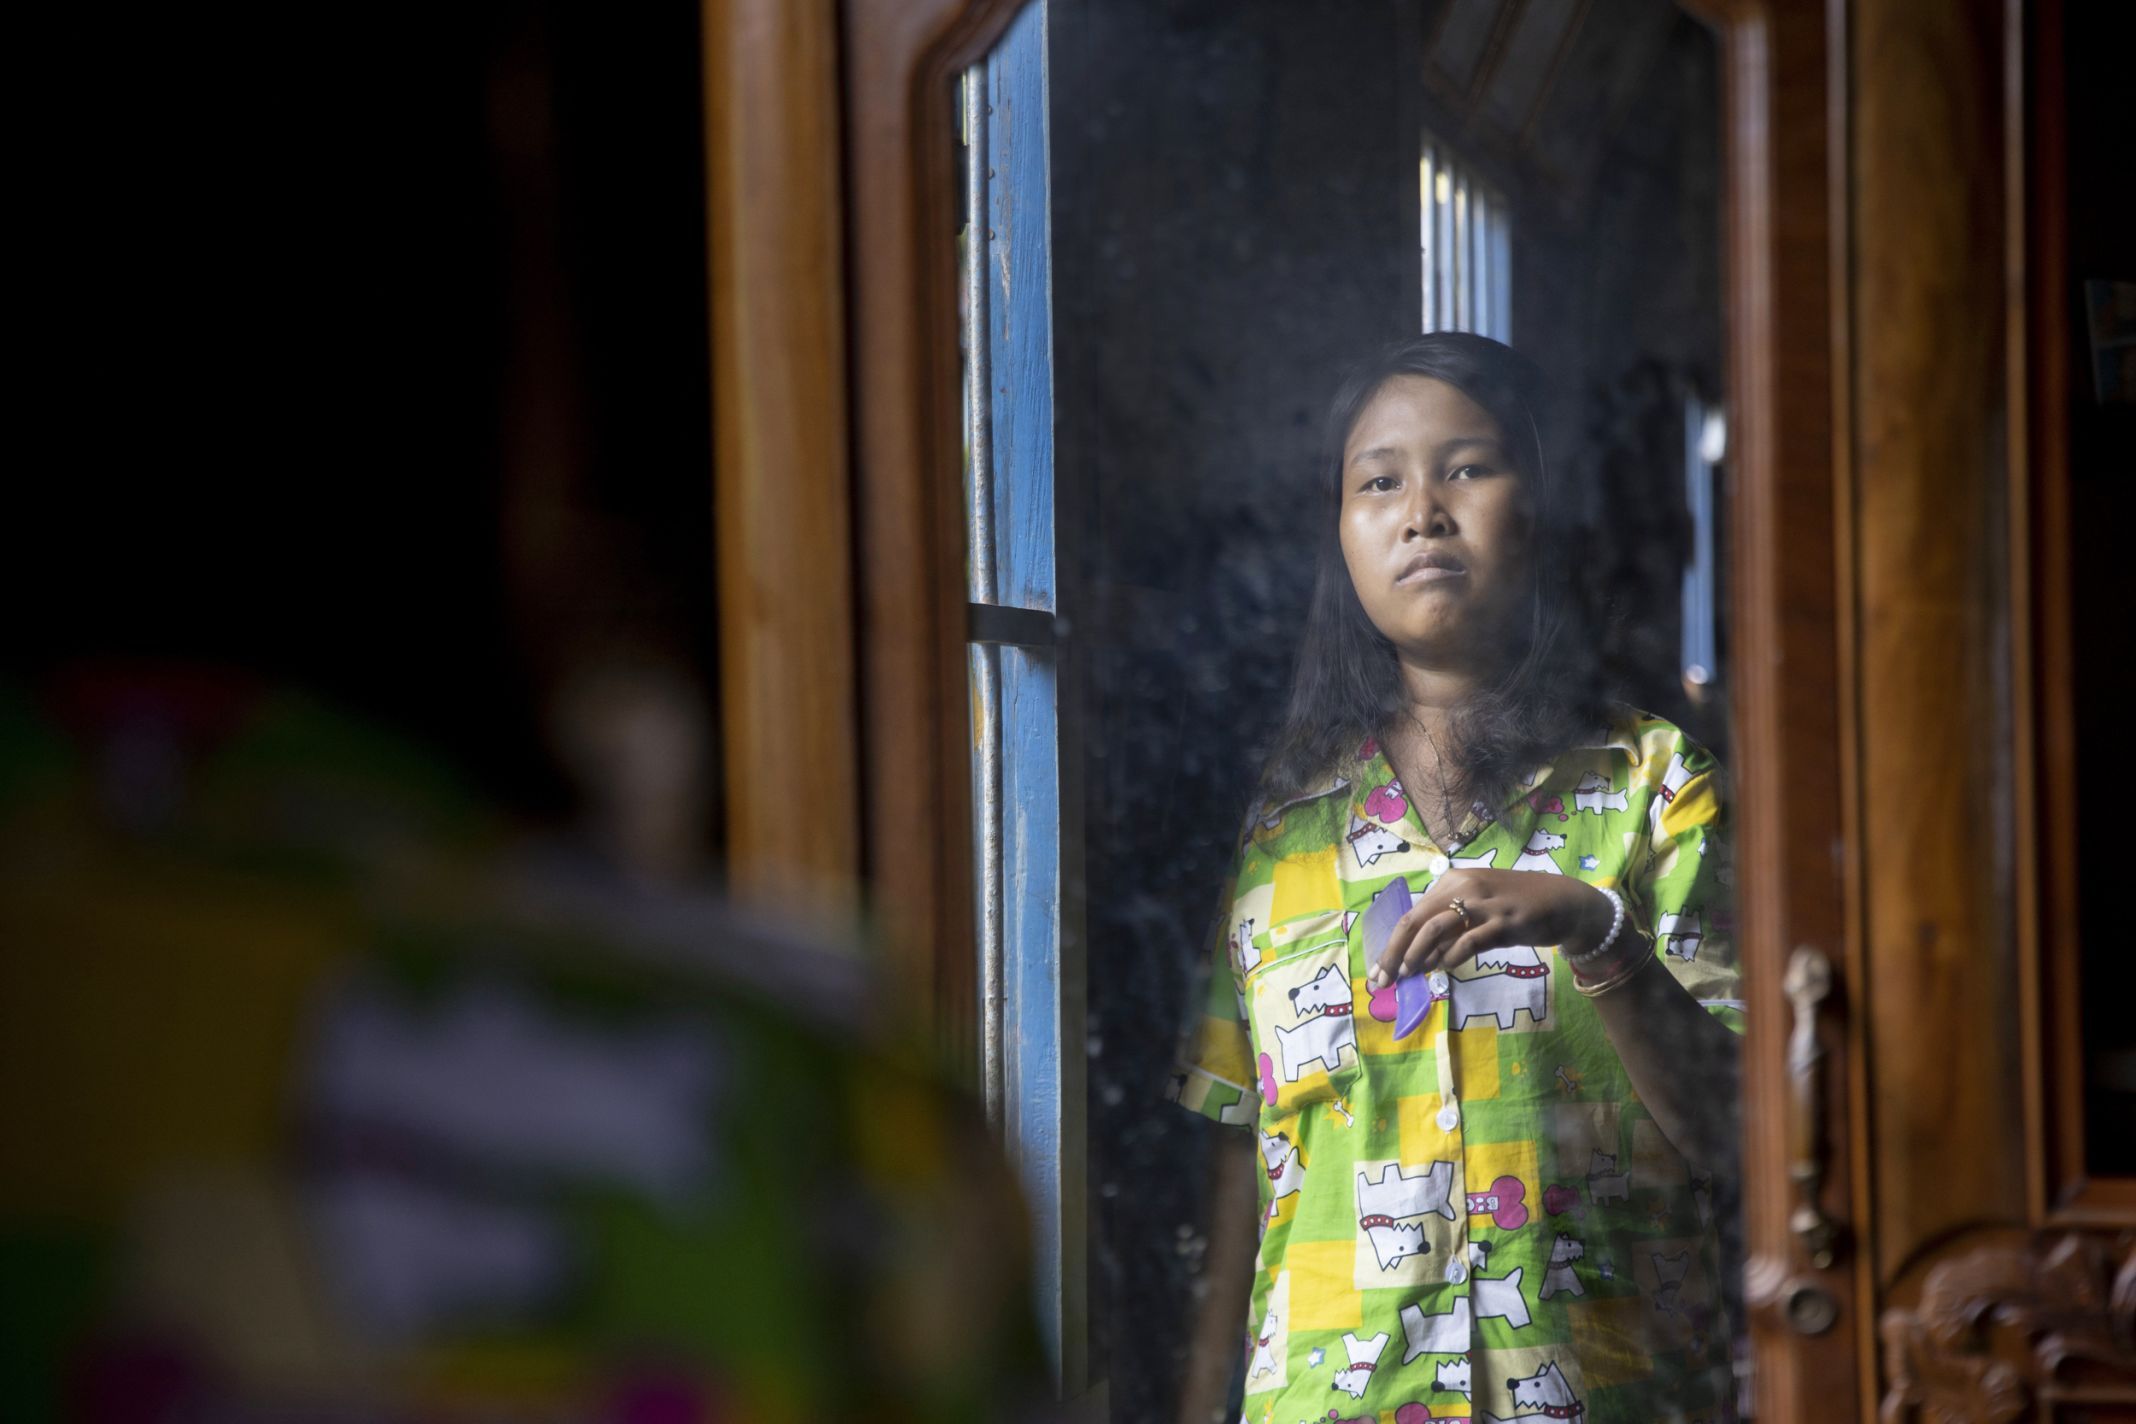 Lang Heang Khim, 22, looks in the mirror while brushing her hair in the village of Chong Trek. Image by Paula Bronstein. Cambodia, 2019.